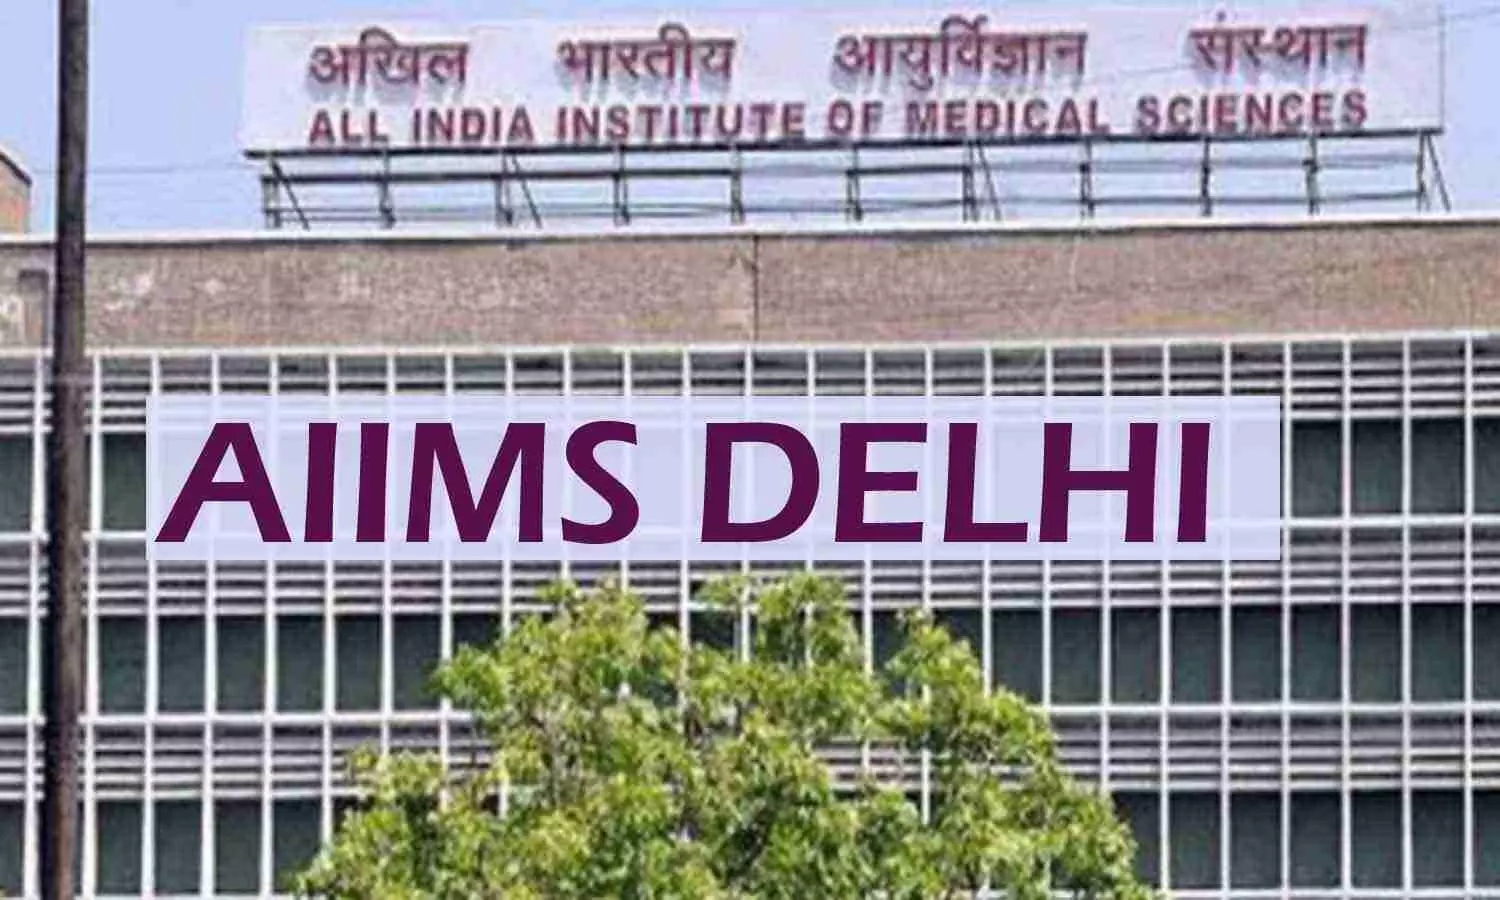 Relief to Cancer patients: AIIMS Delhi to now offer OPD registrations from 8am to 1pm